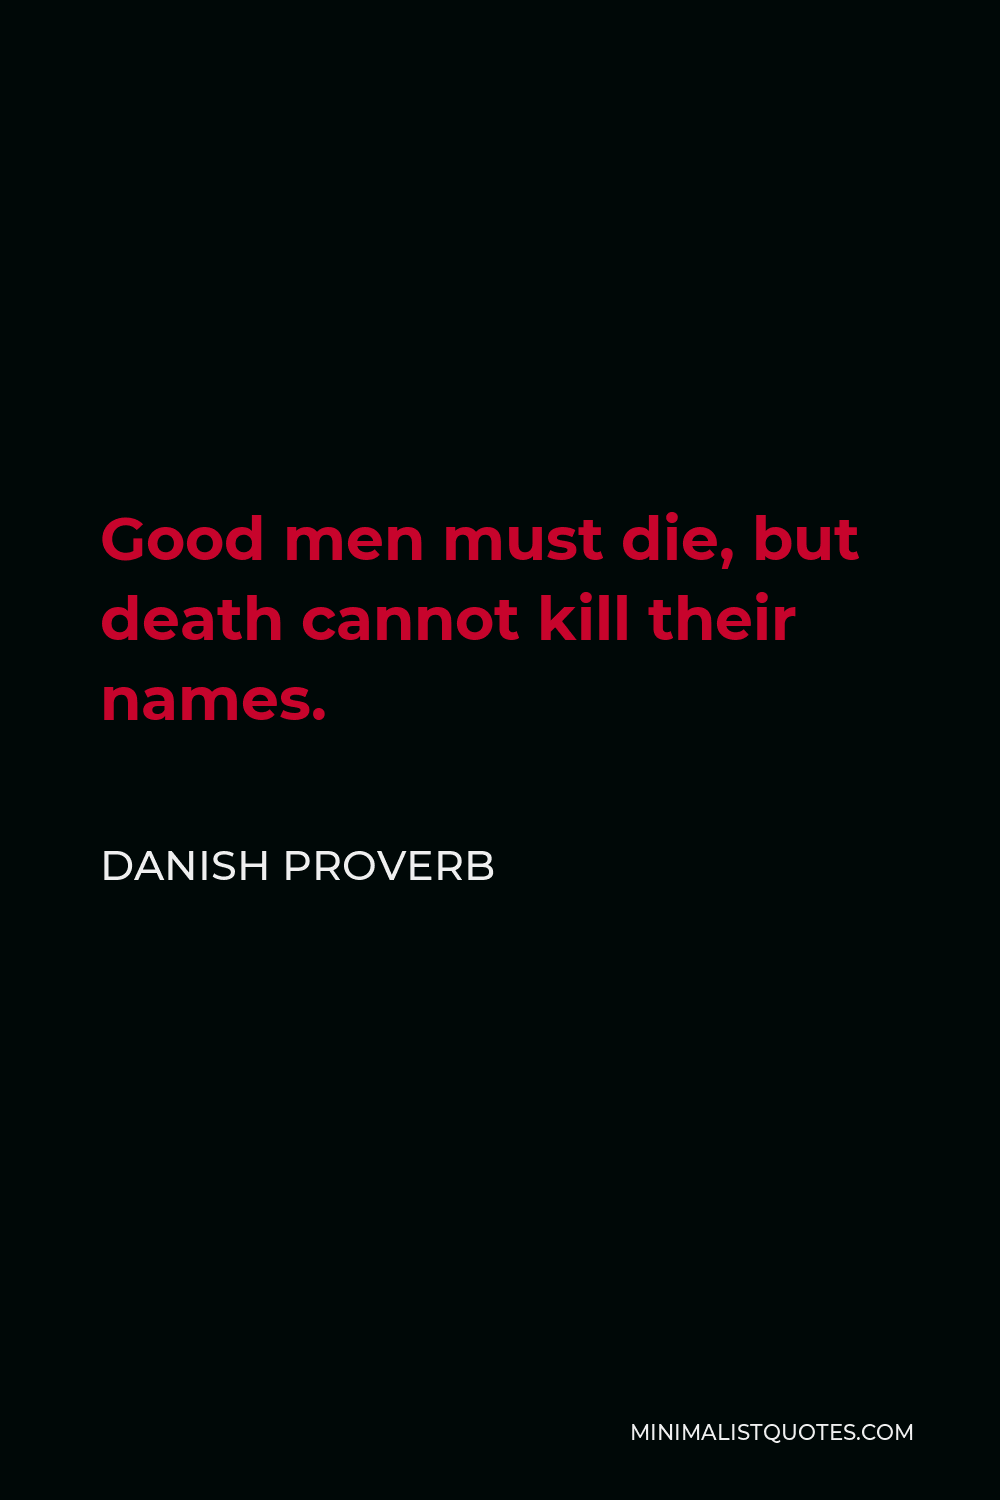 Danish Proverb Quote - Good men must die, but death cannot kill their names.